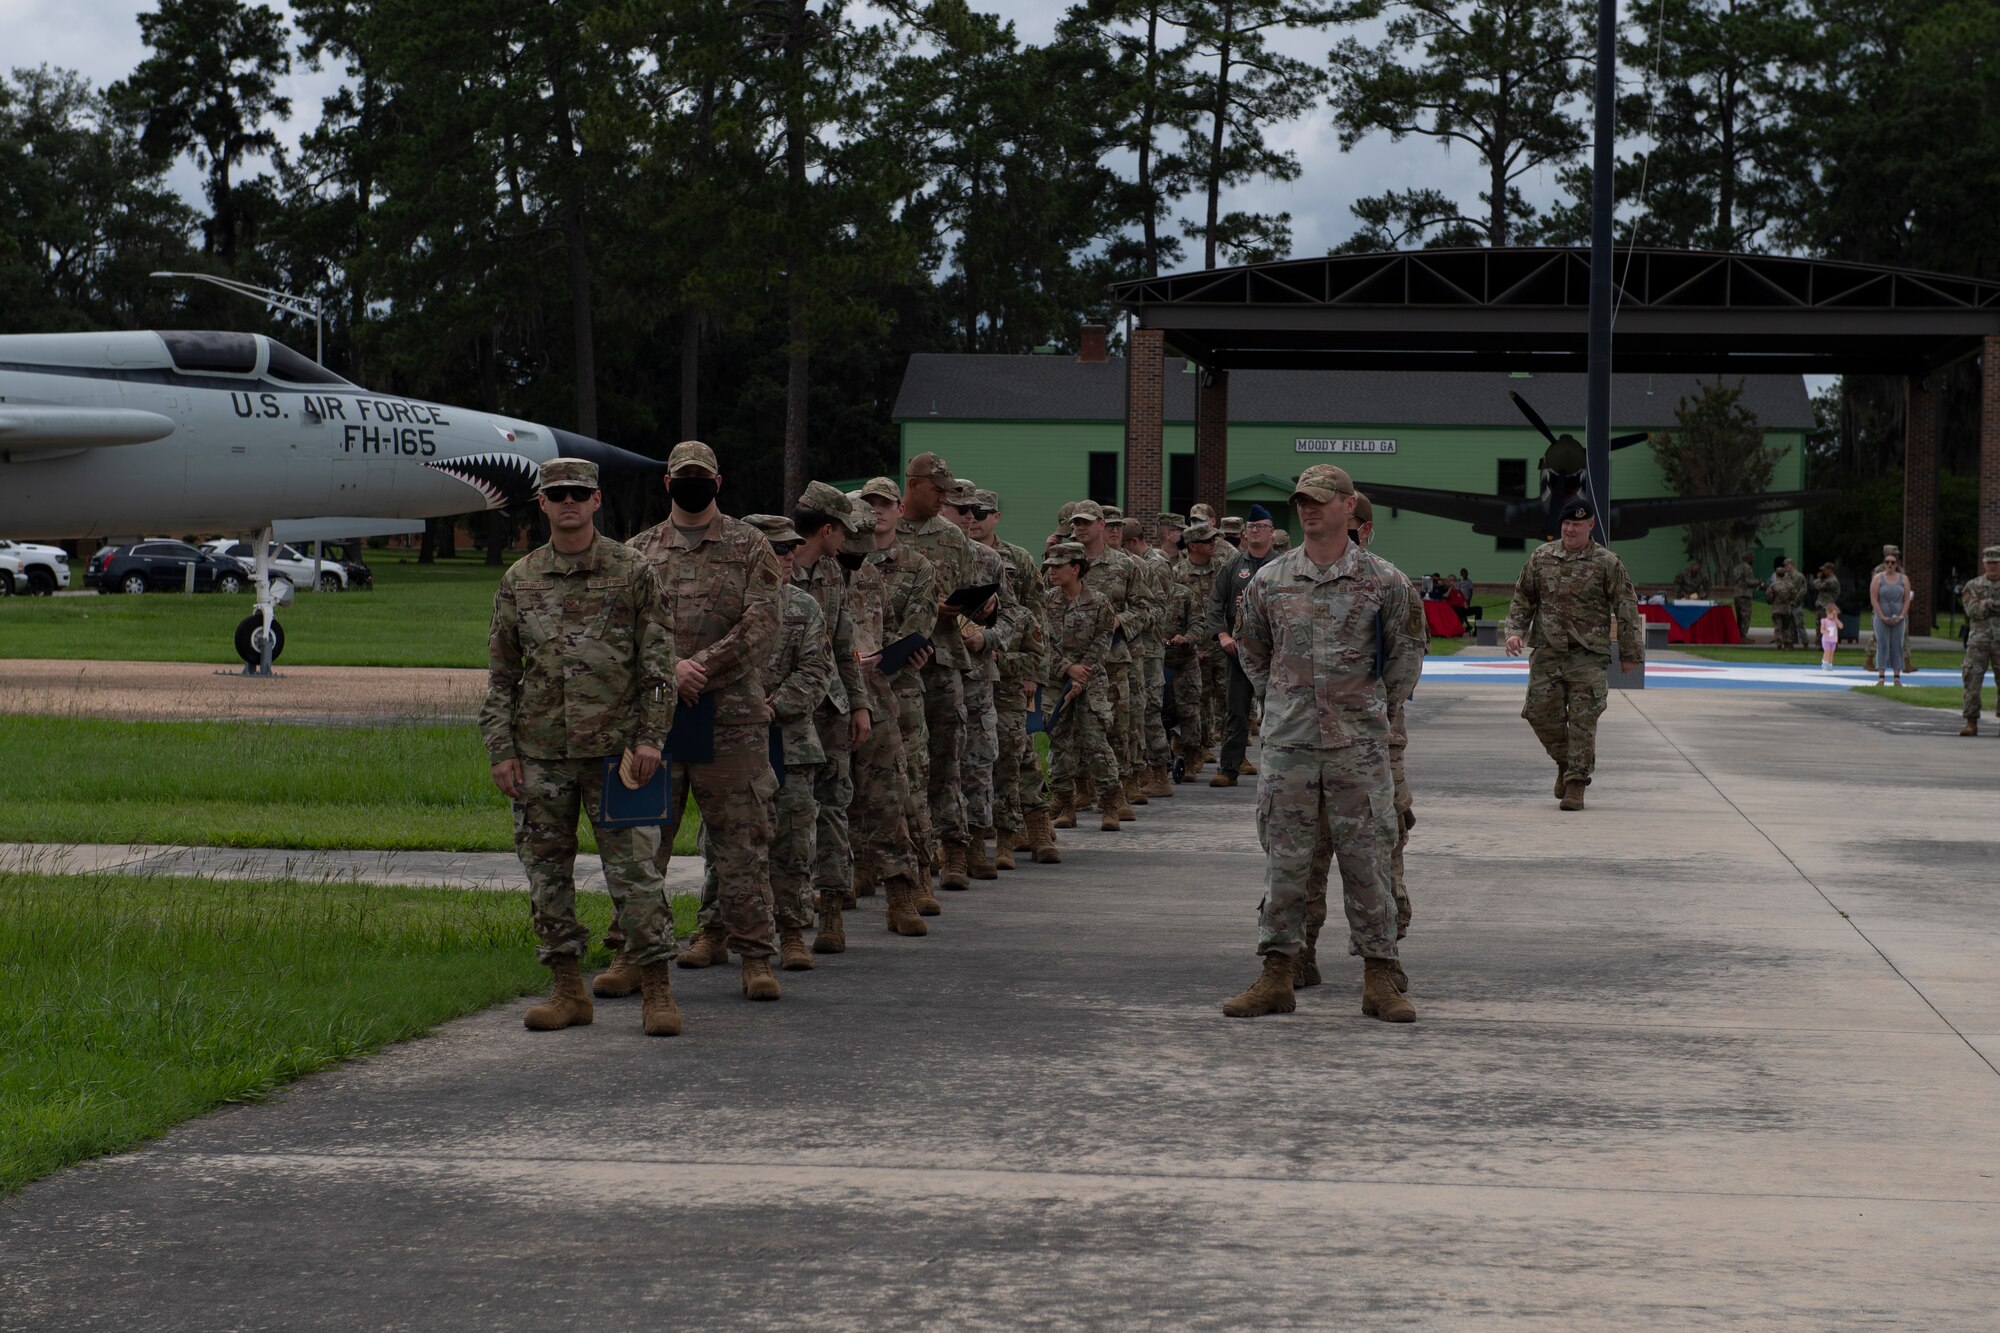 A photo of 40 Airmen standing in line.